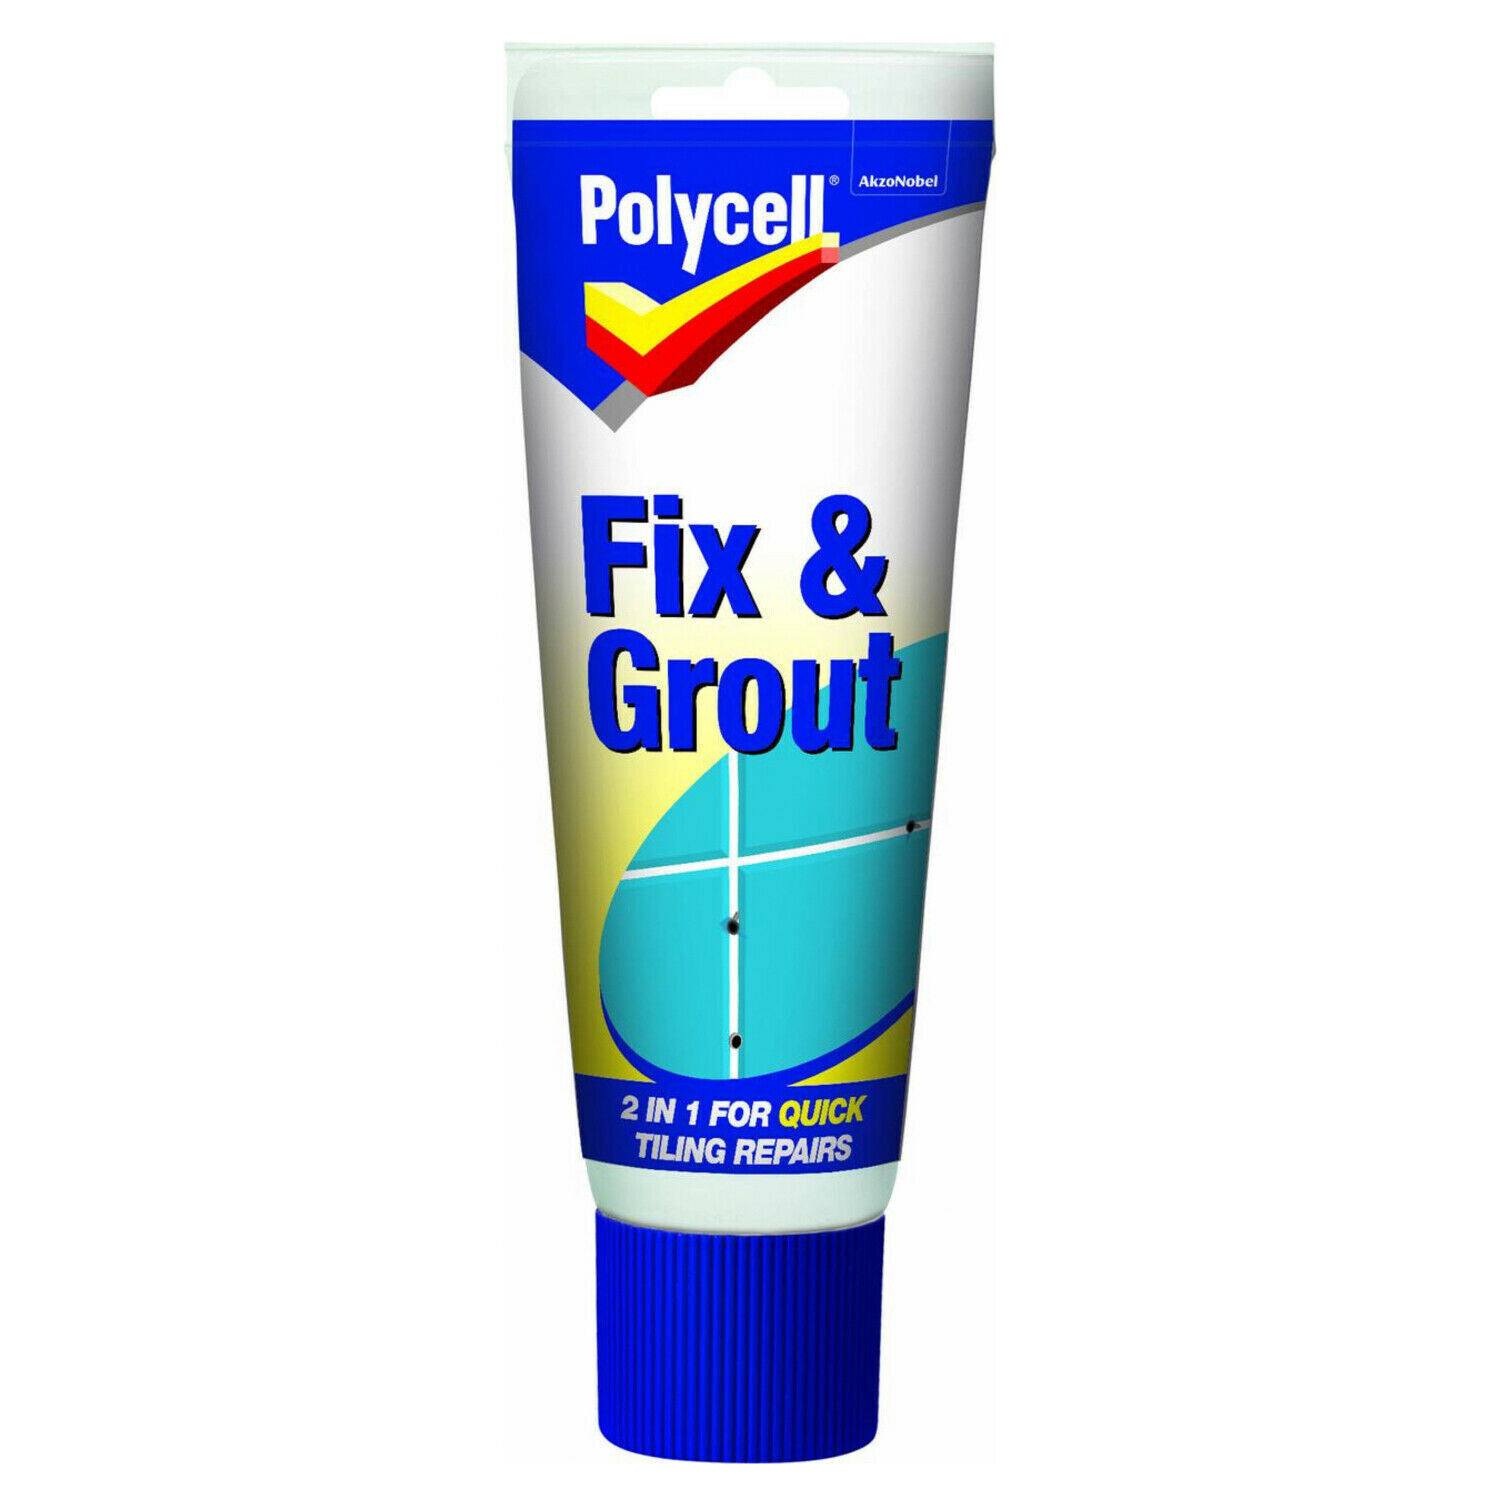 Polycell Tile Fix & Grout 330g White DIY Decorating Waterproof Kitchen Bathroom